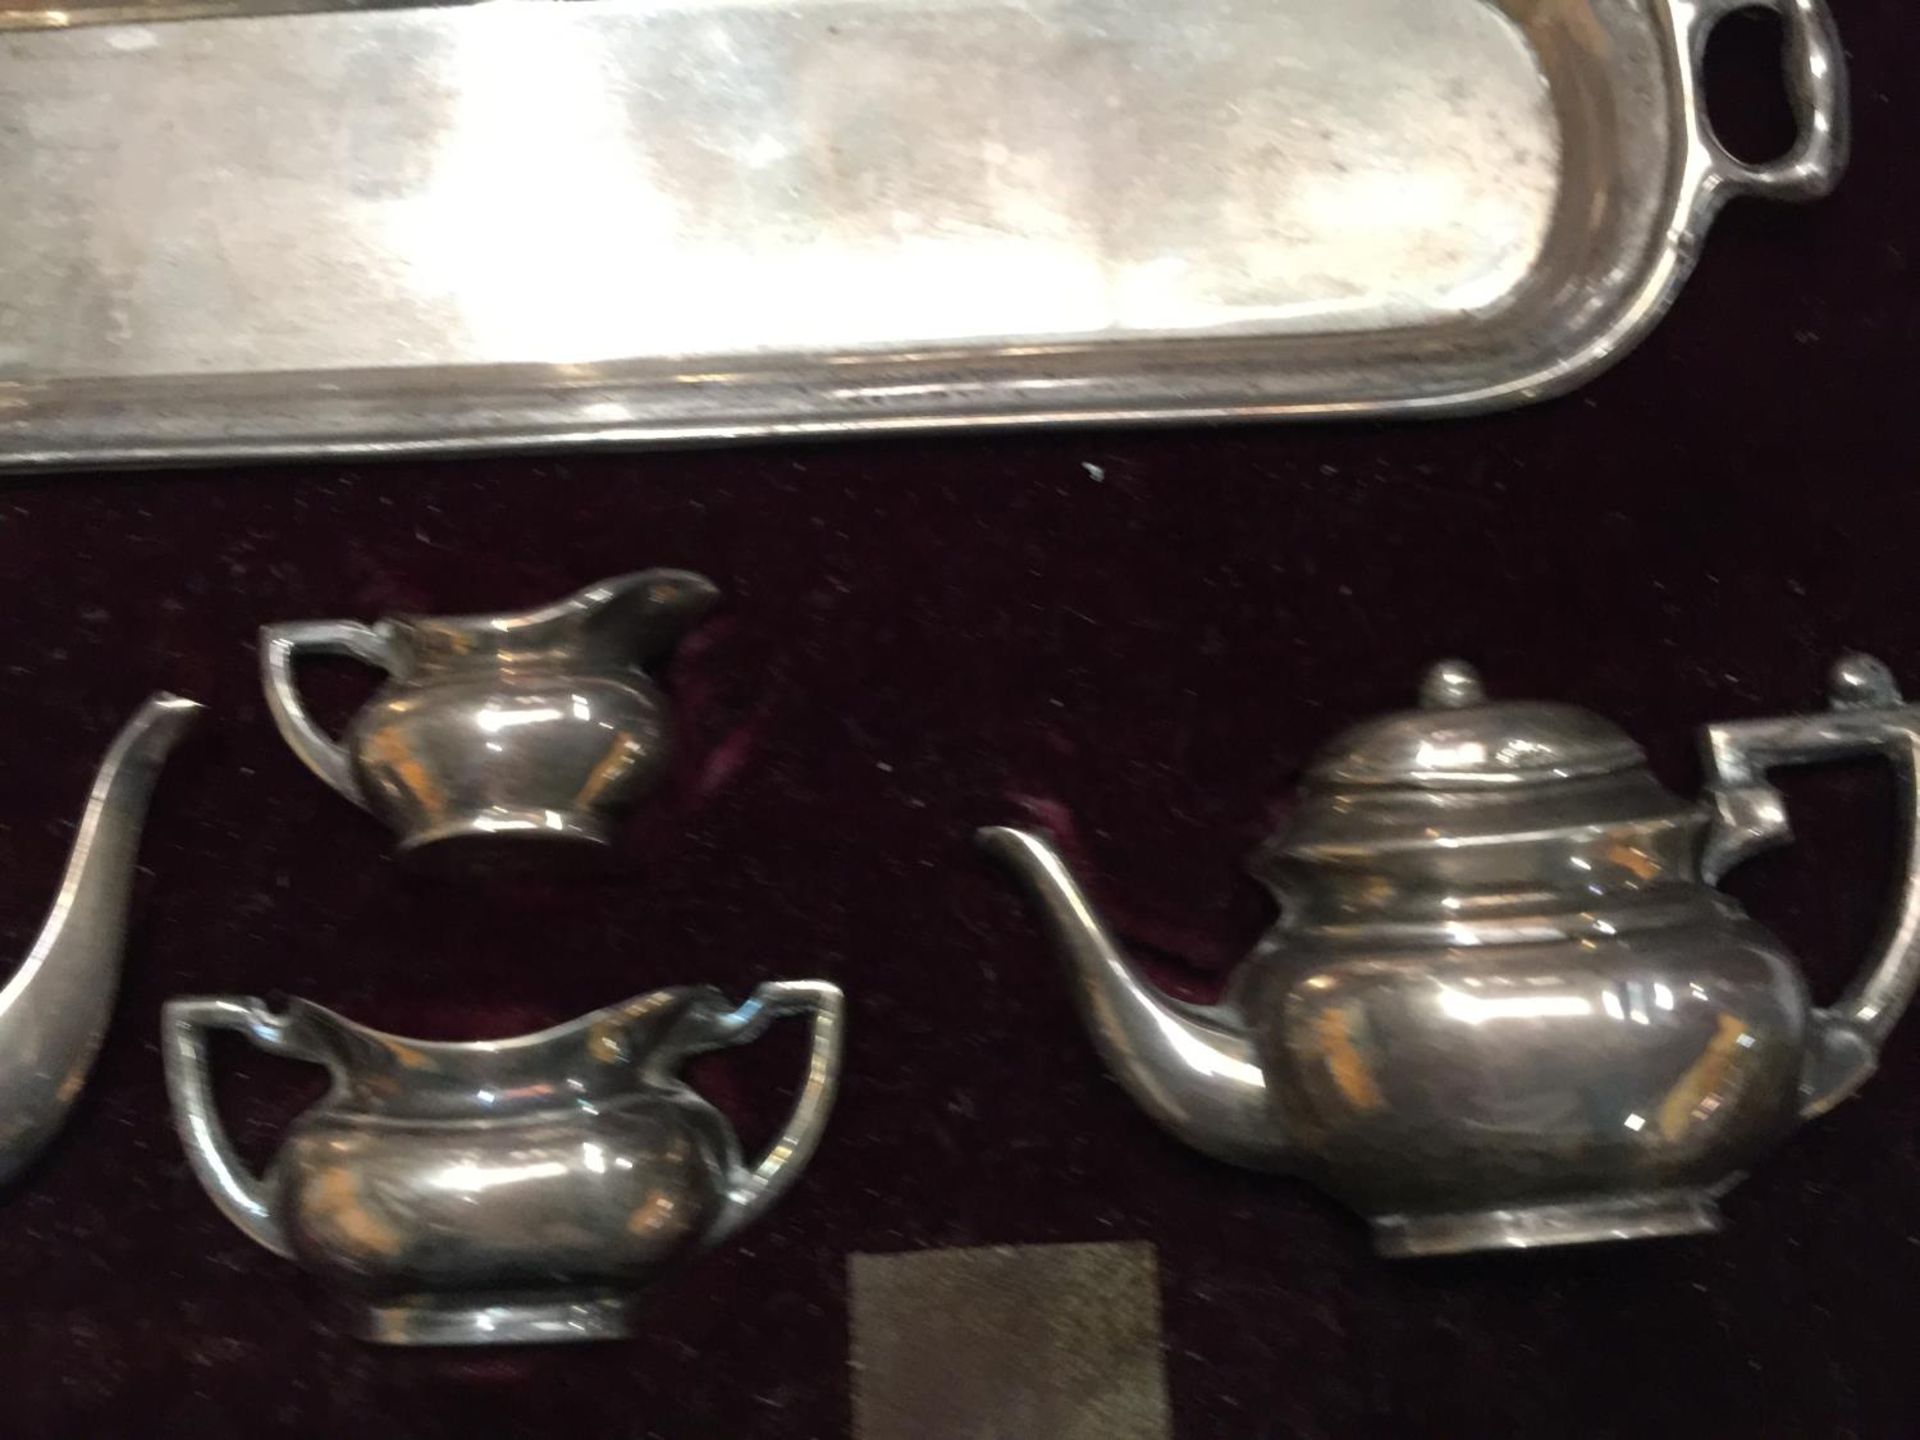 A SET OF BIRMINGHAM HALLMARKED SILVER MINIATURE TEAPOTS AND JUGS IN A CASE - Image 4 of 5